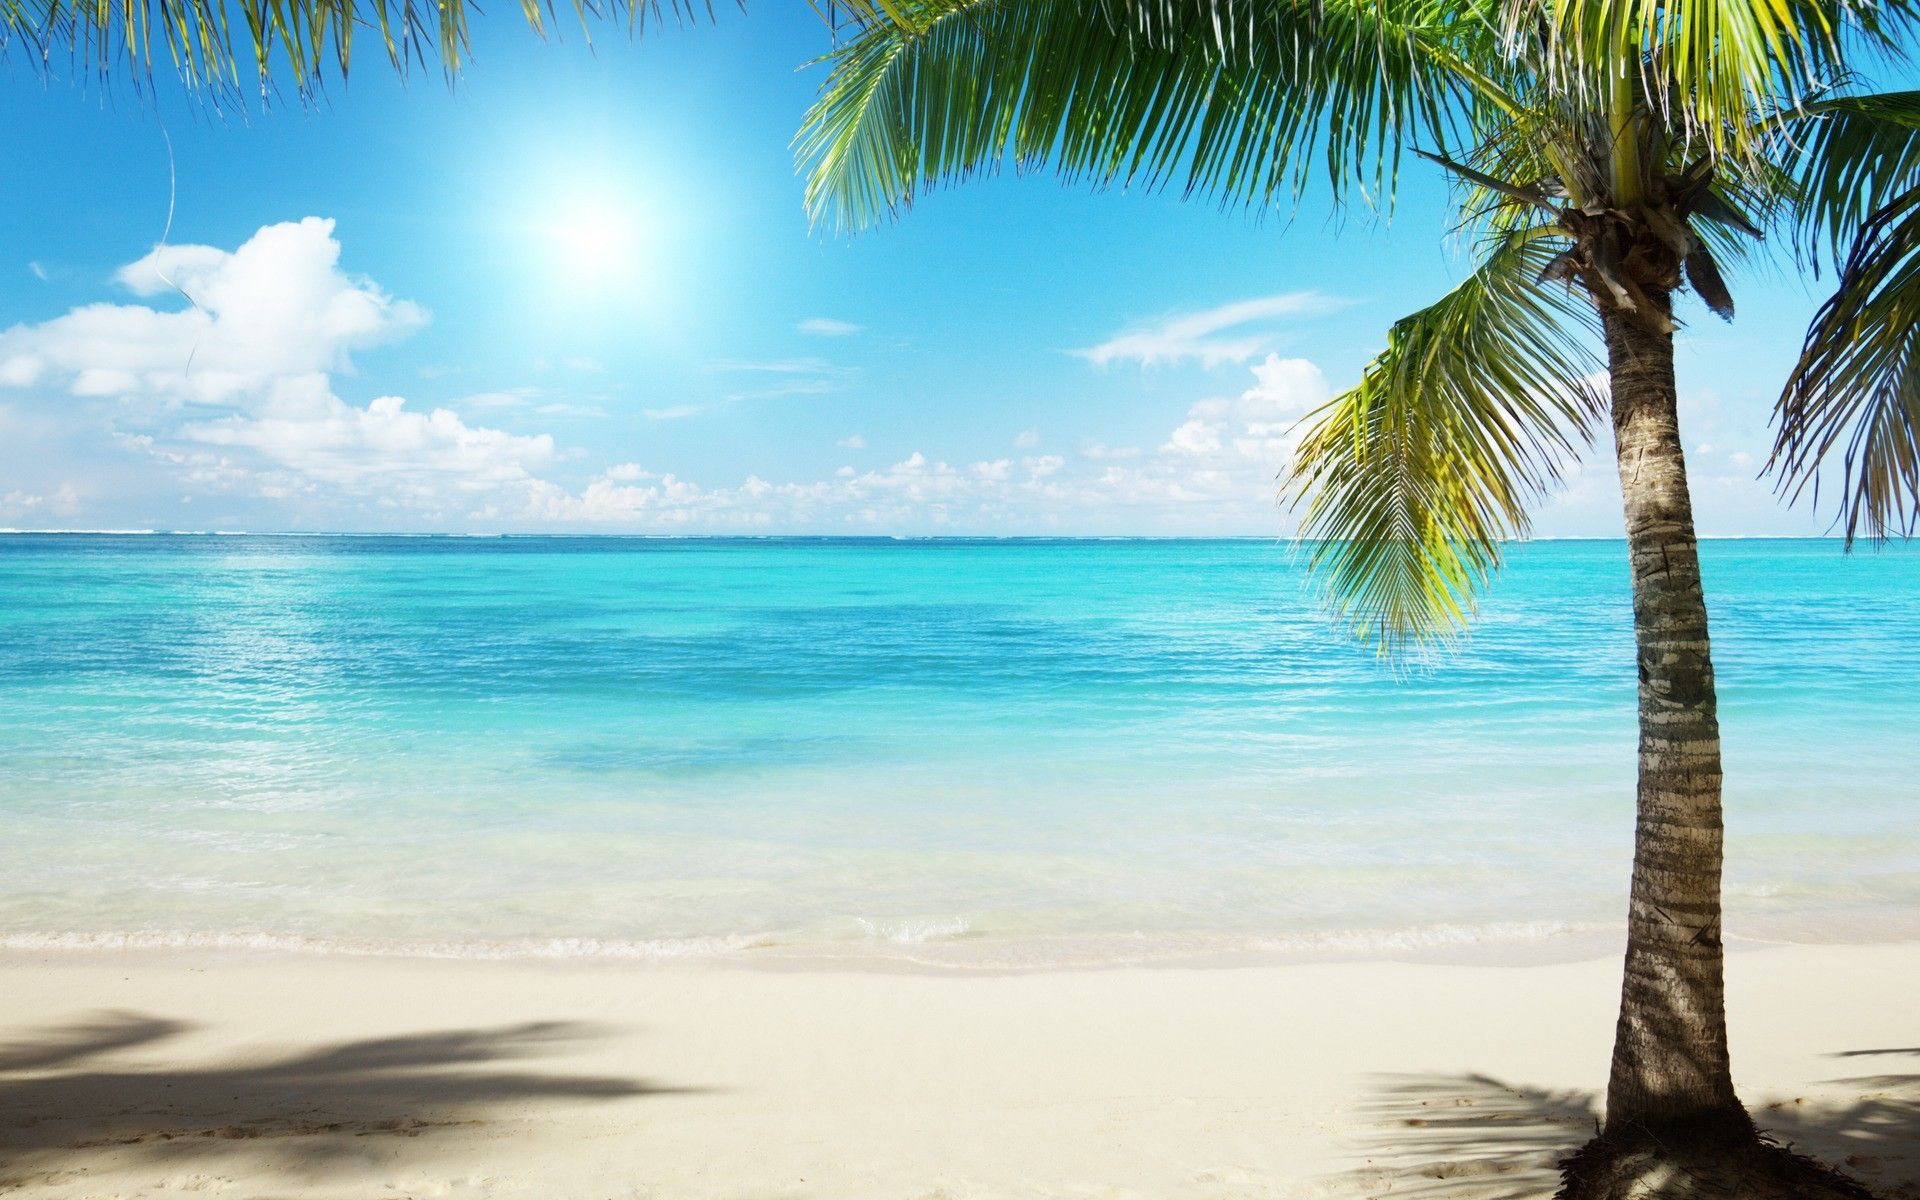 Featured image of post Widescreen Beach Wallpaper Desktop / You can also use a desktop background as.